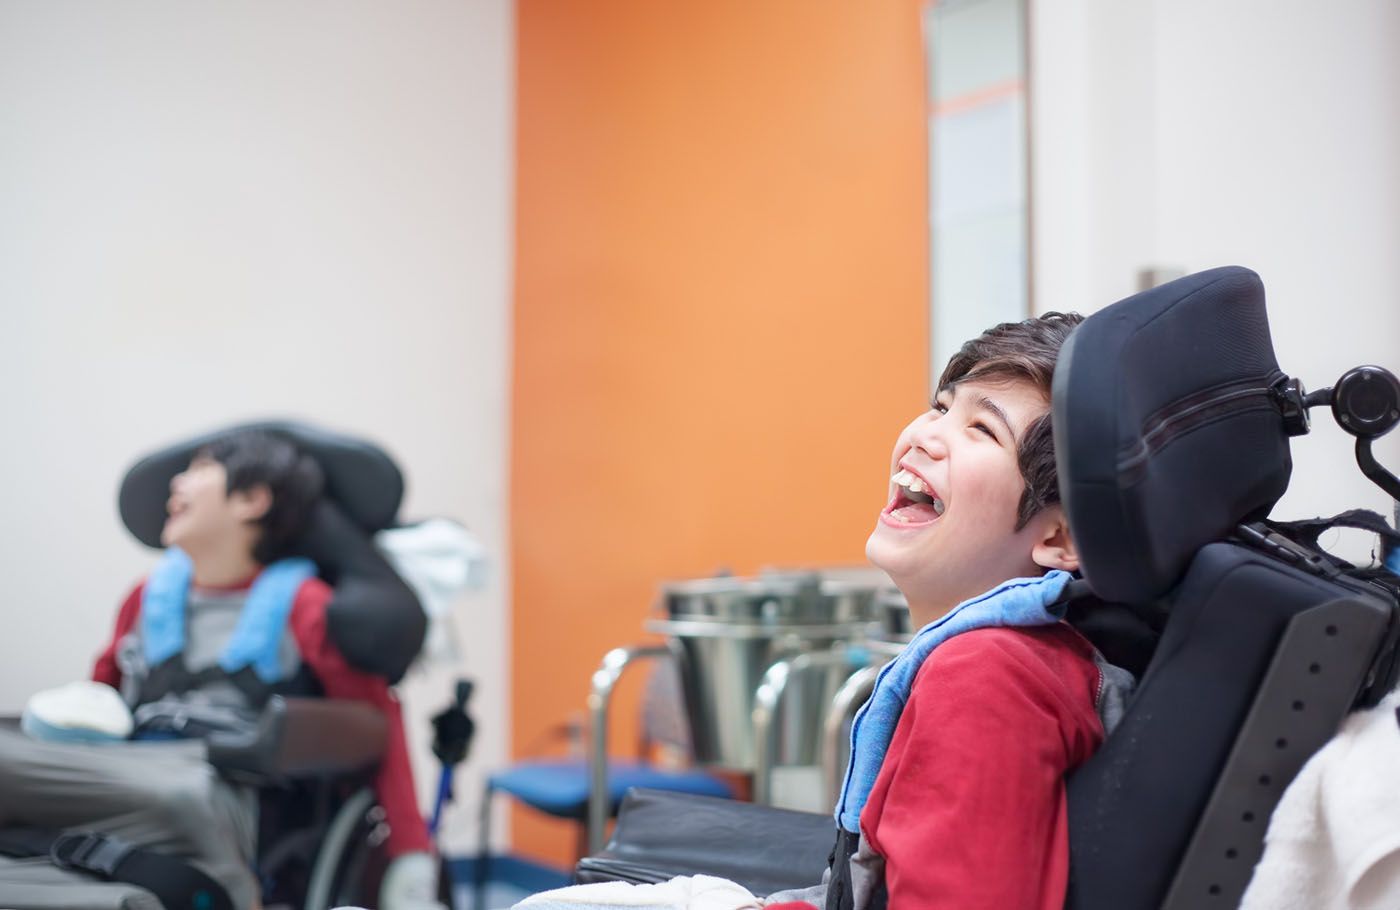 A joyful moment captured between a boy in a wheelchair and his friend.